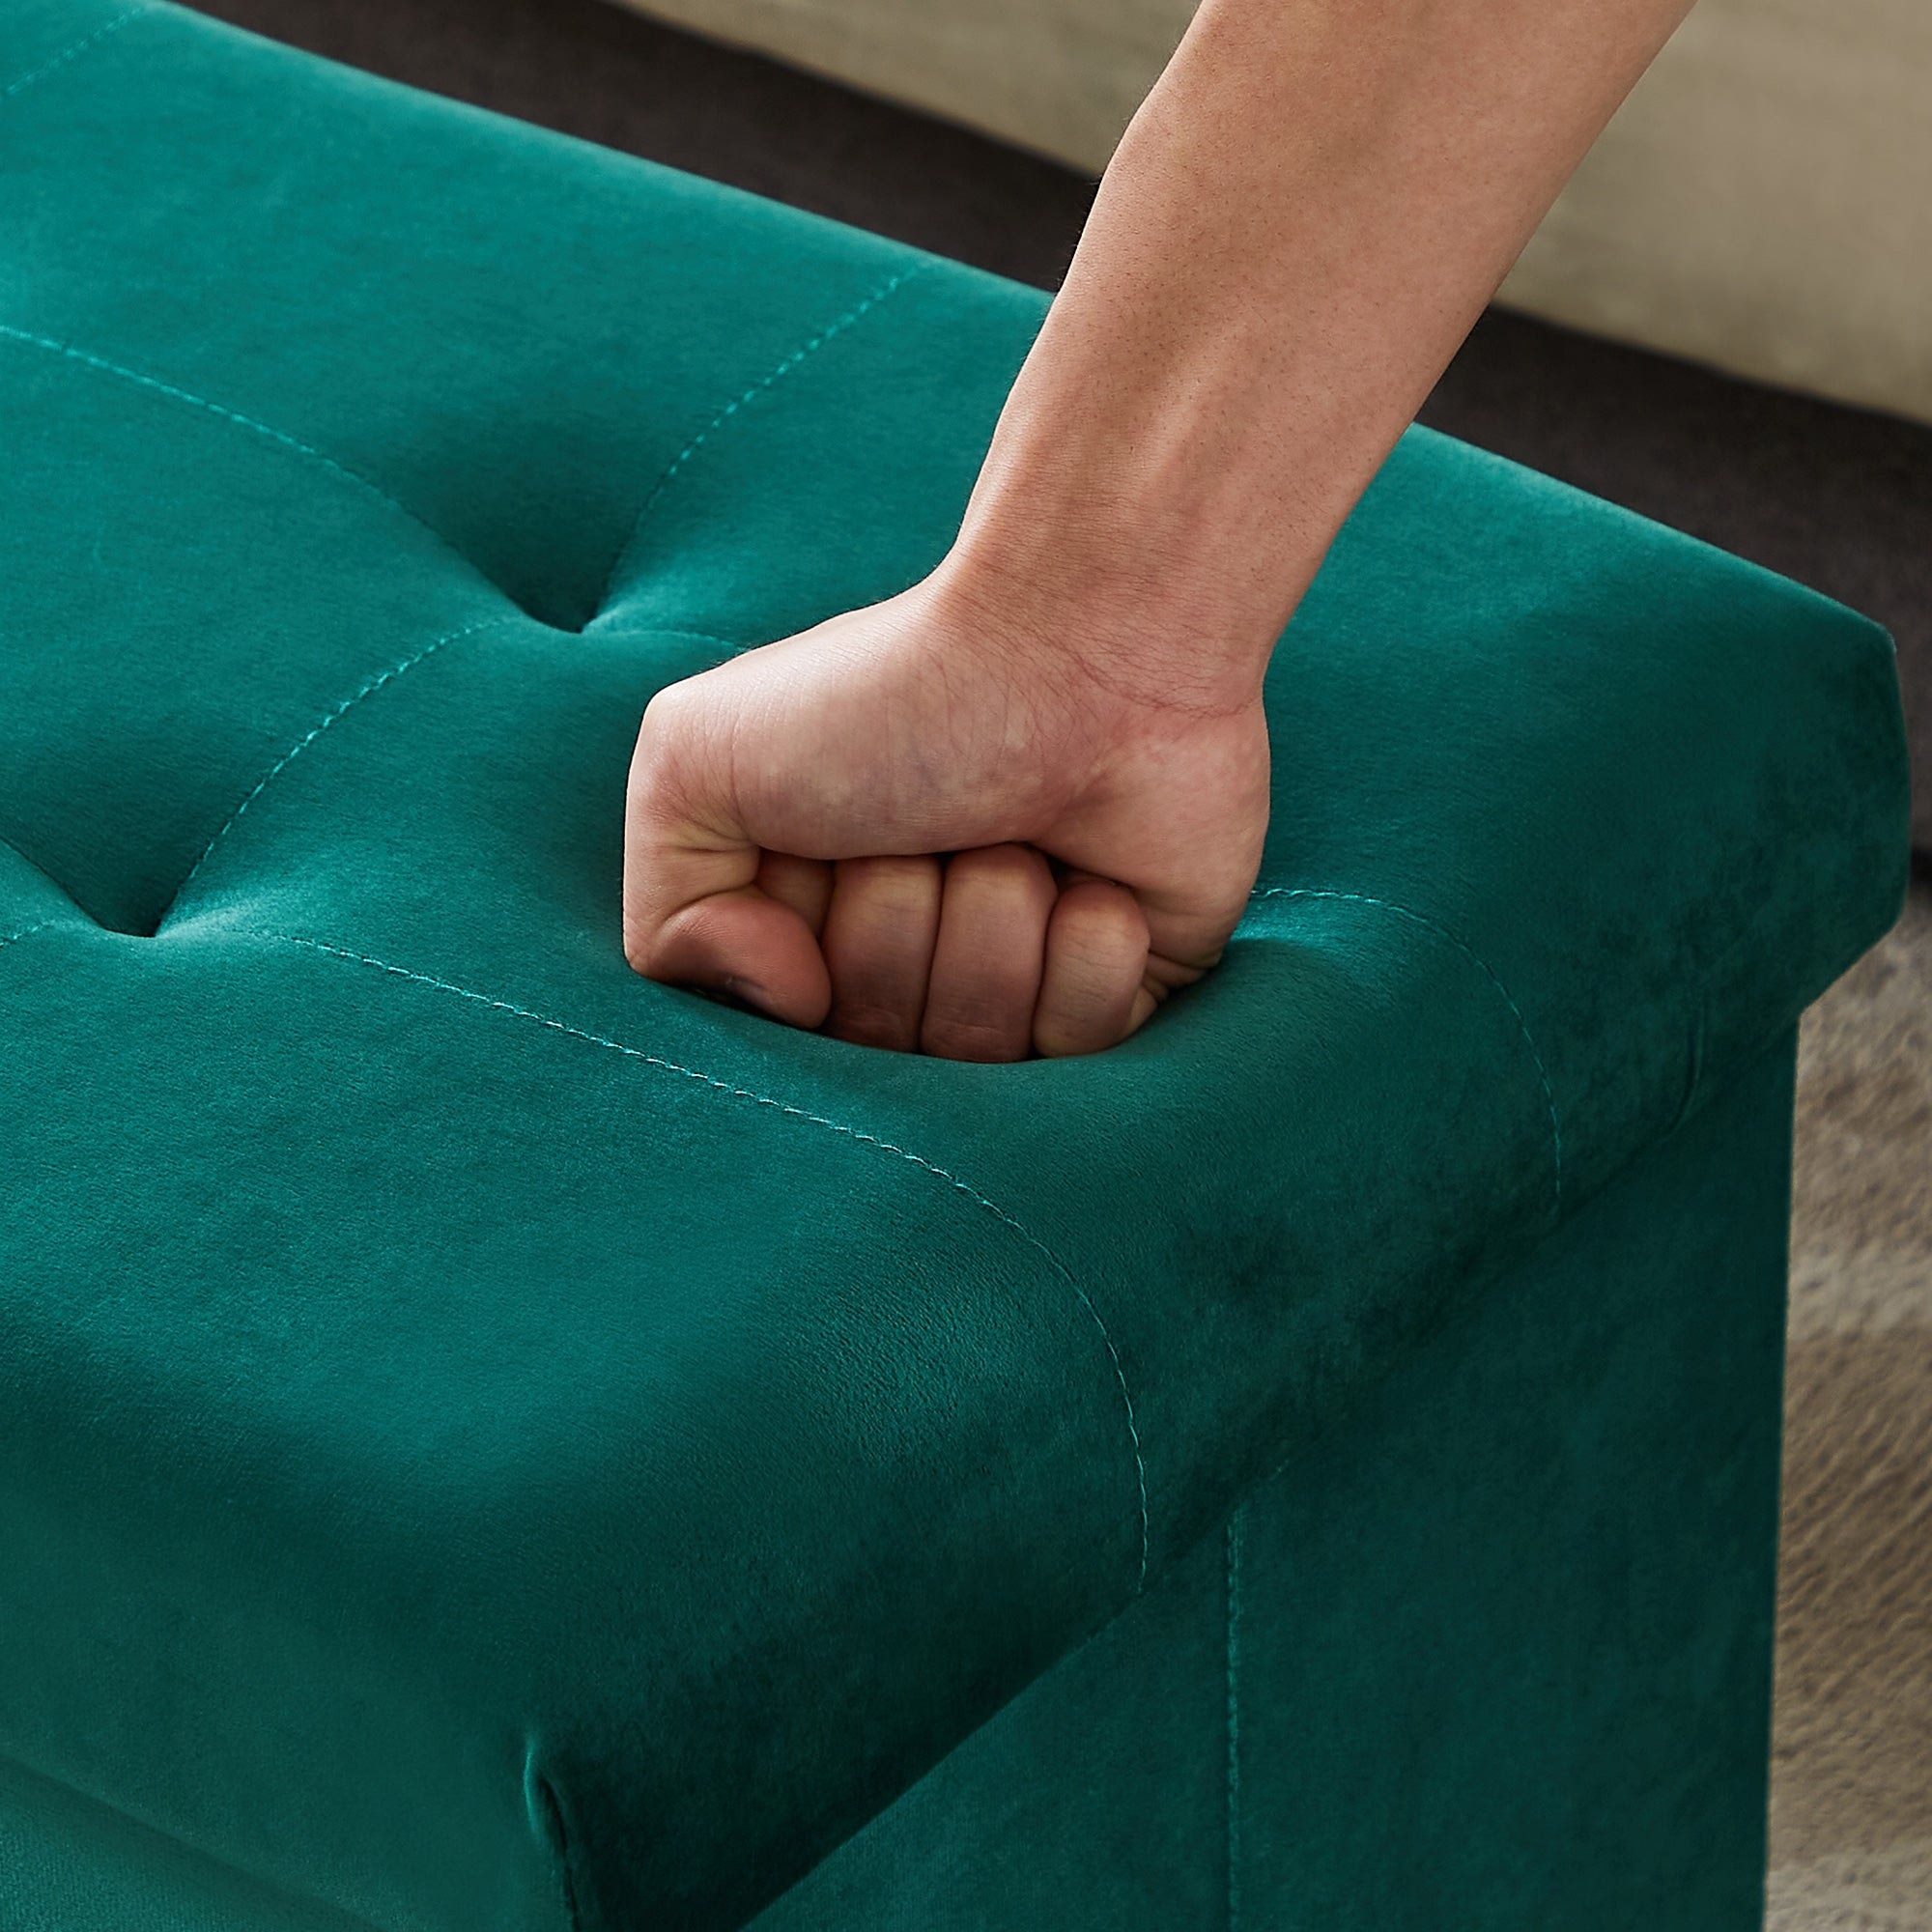 https://ak1.ostkcdn.com/images/products/is/images/direct/0868b6d7ffeb1f011e35671a321df8cf3c3cd368/VECELO-Modern-Folding-Tufted-Square-Storage-Ottoman-Foot-Rest.jpg